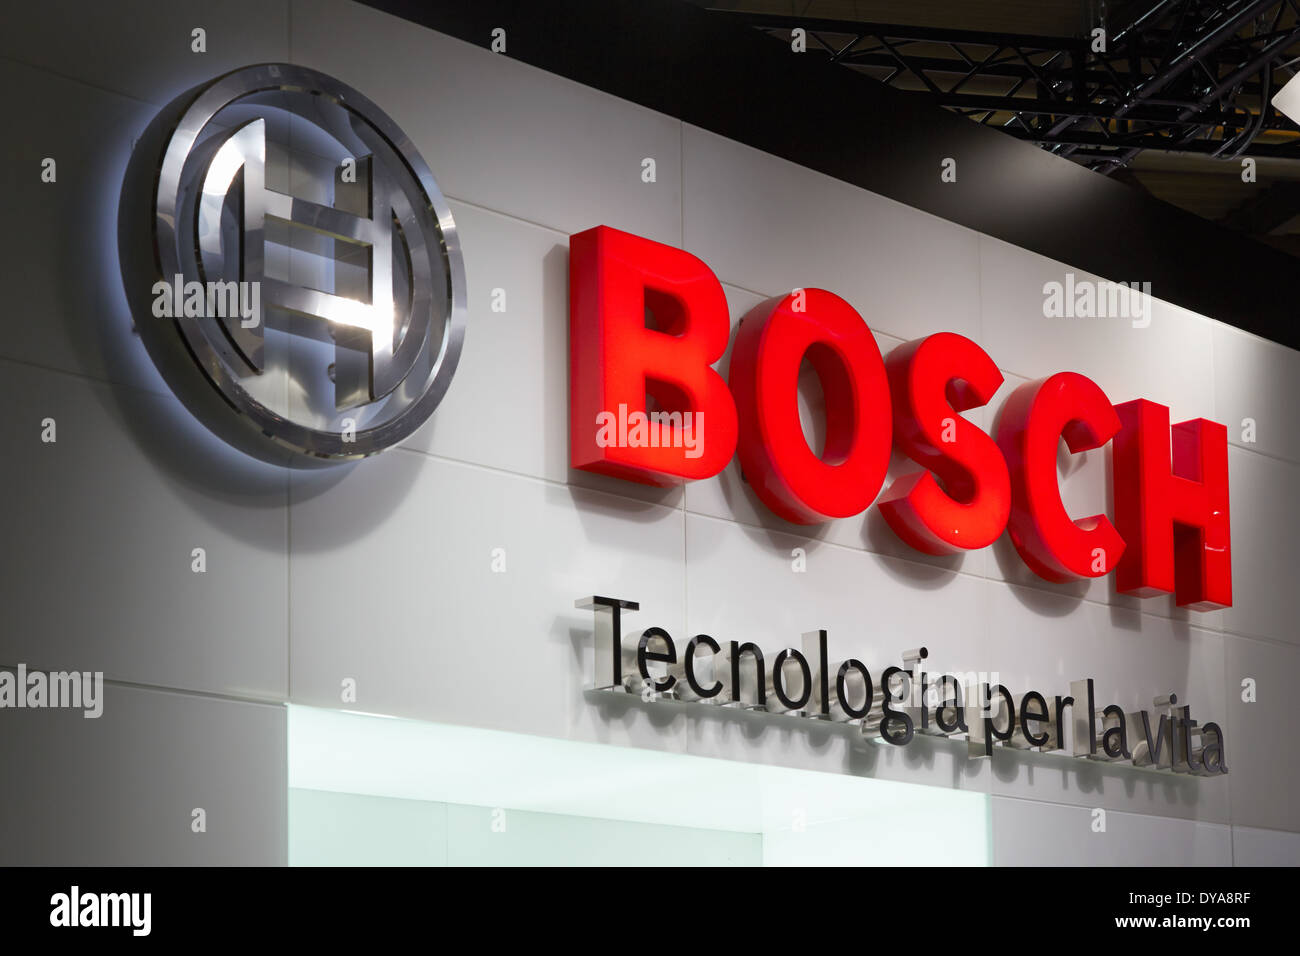 Bosch stand during Salone del Mobile, international furniture fair in Milan Stock Photo